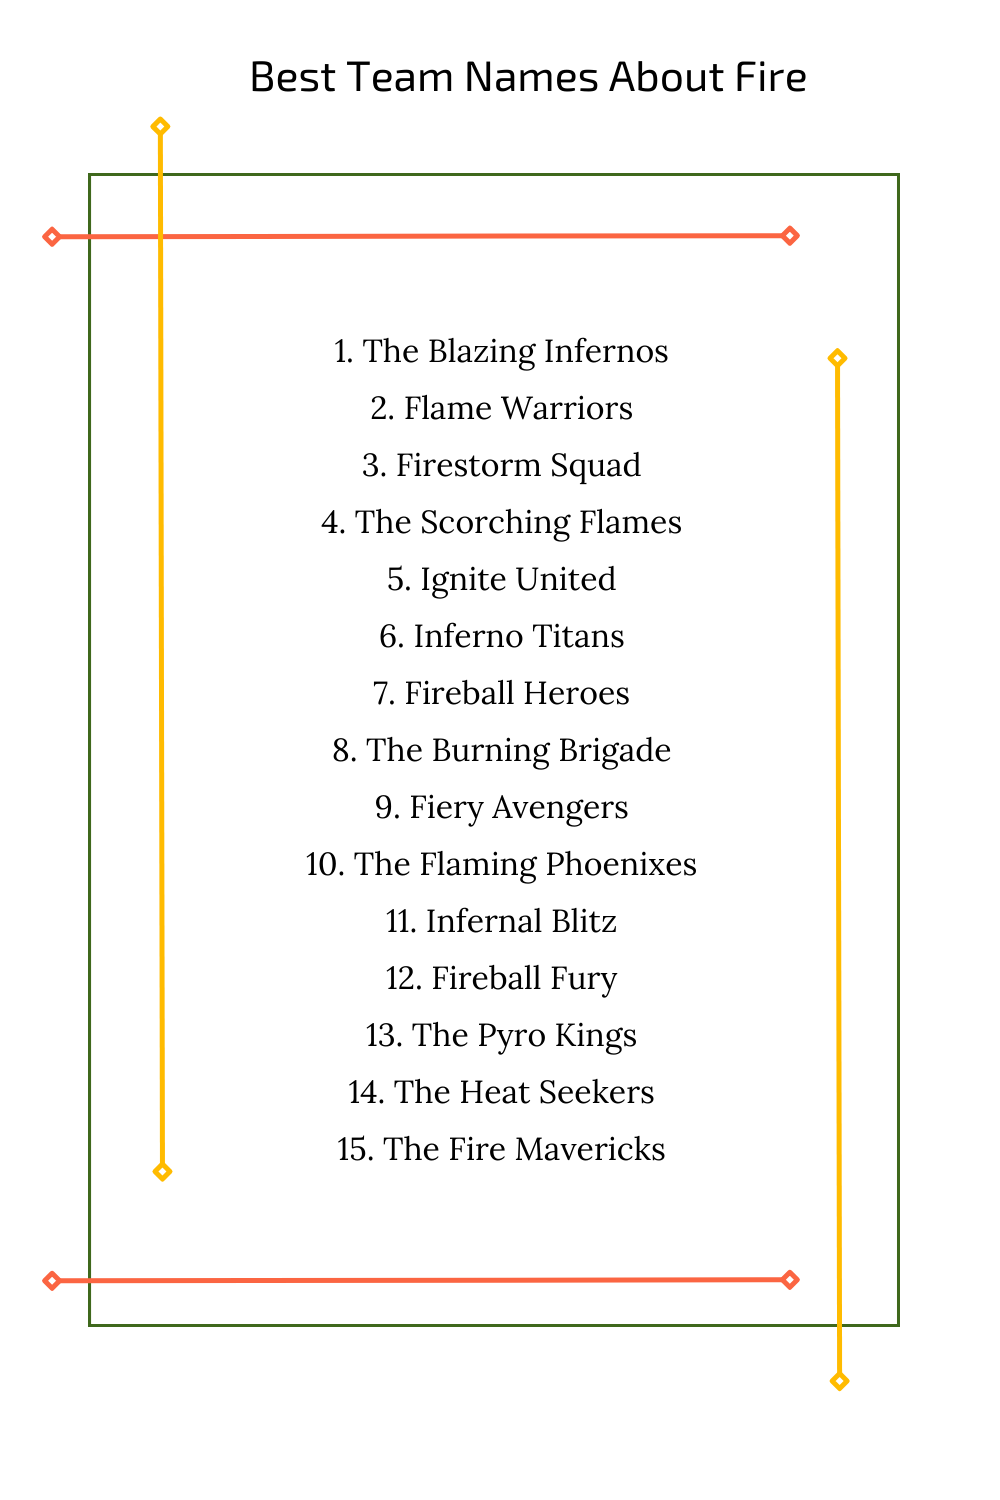 Best Team Names About Fire